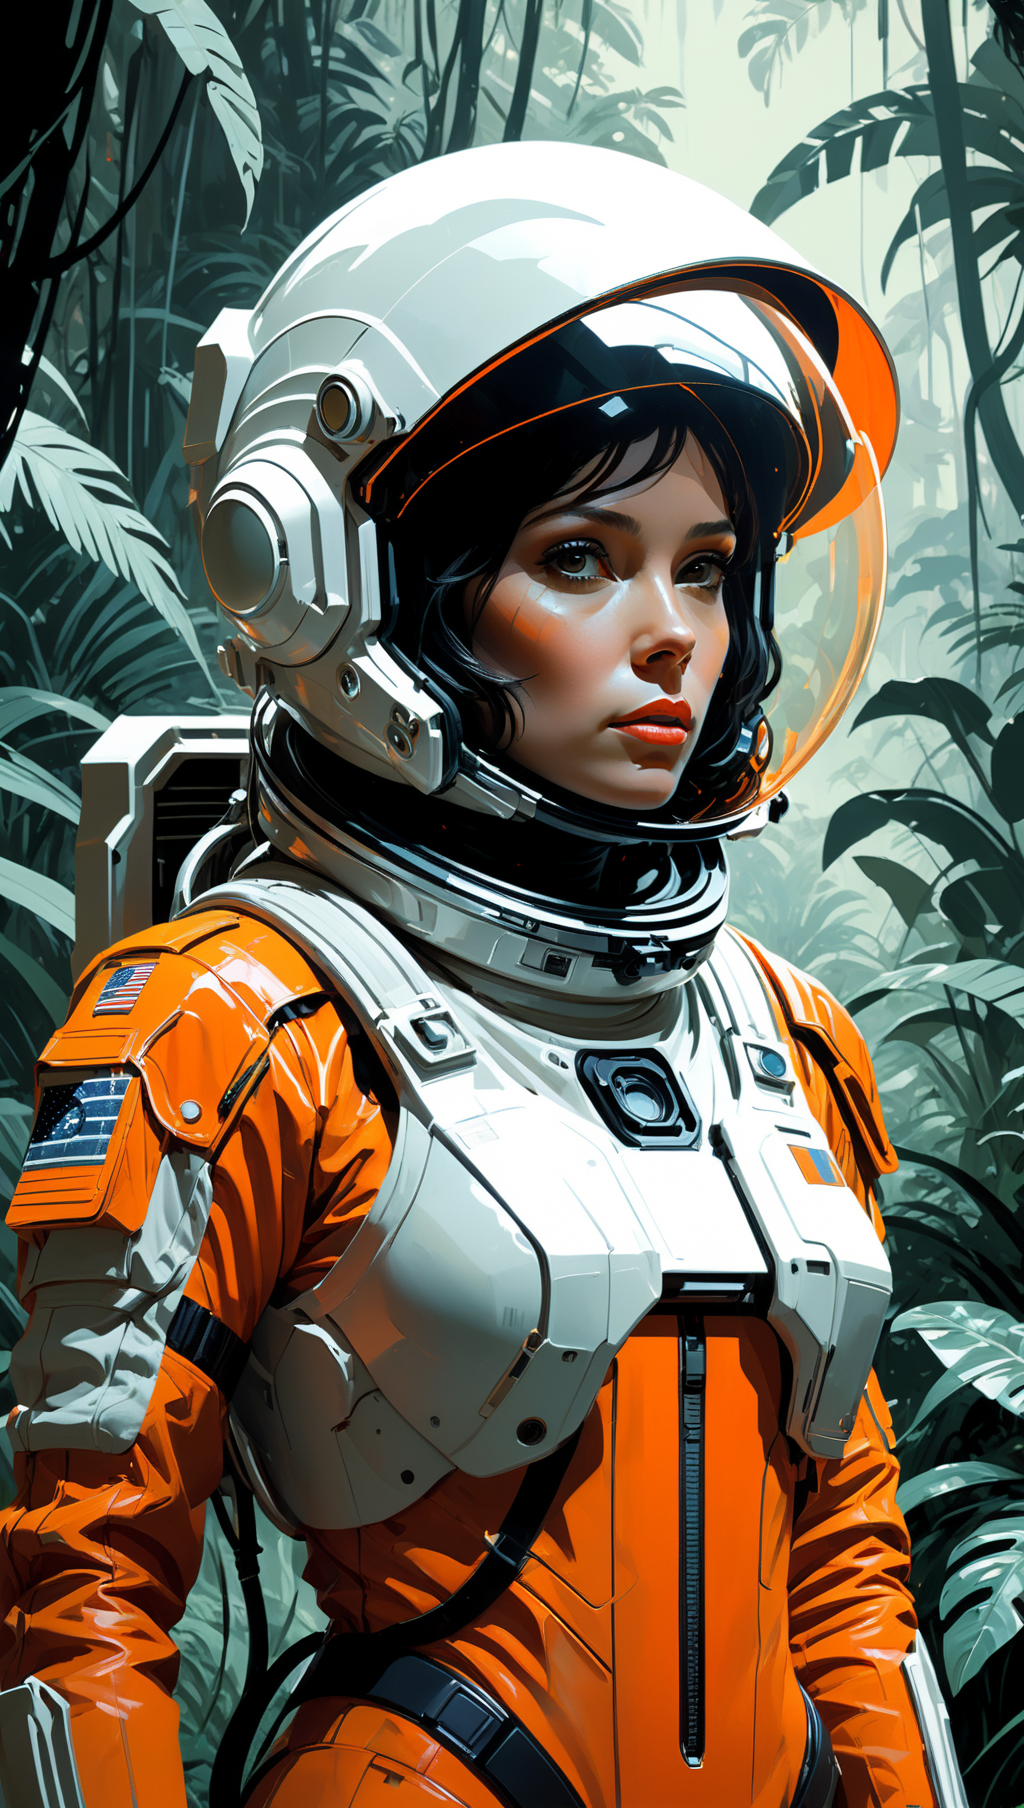 waist-up "female Astronaut in a Jungle" by Syd Mead, broken helmet tangerine cold color palette, muted colors, detailed, 8...